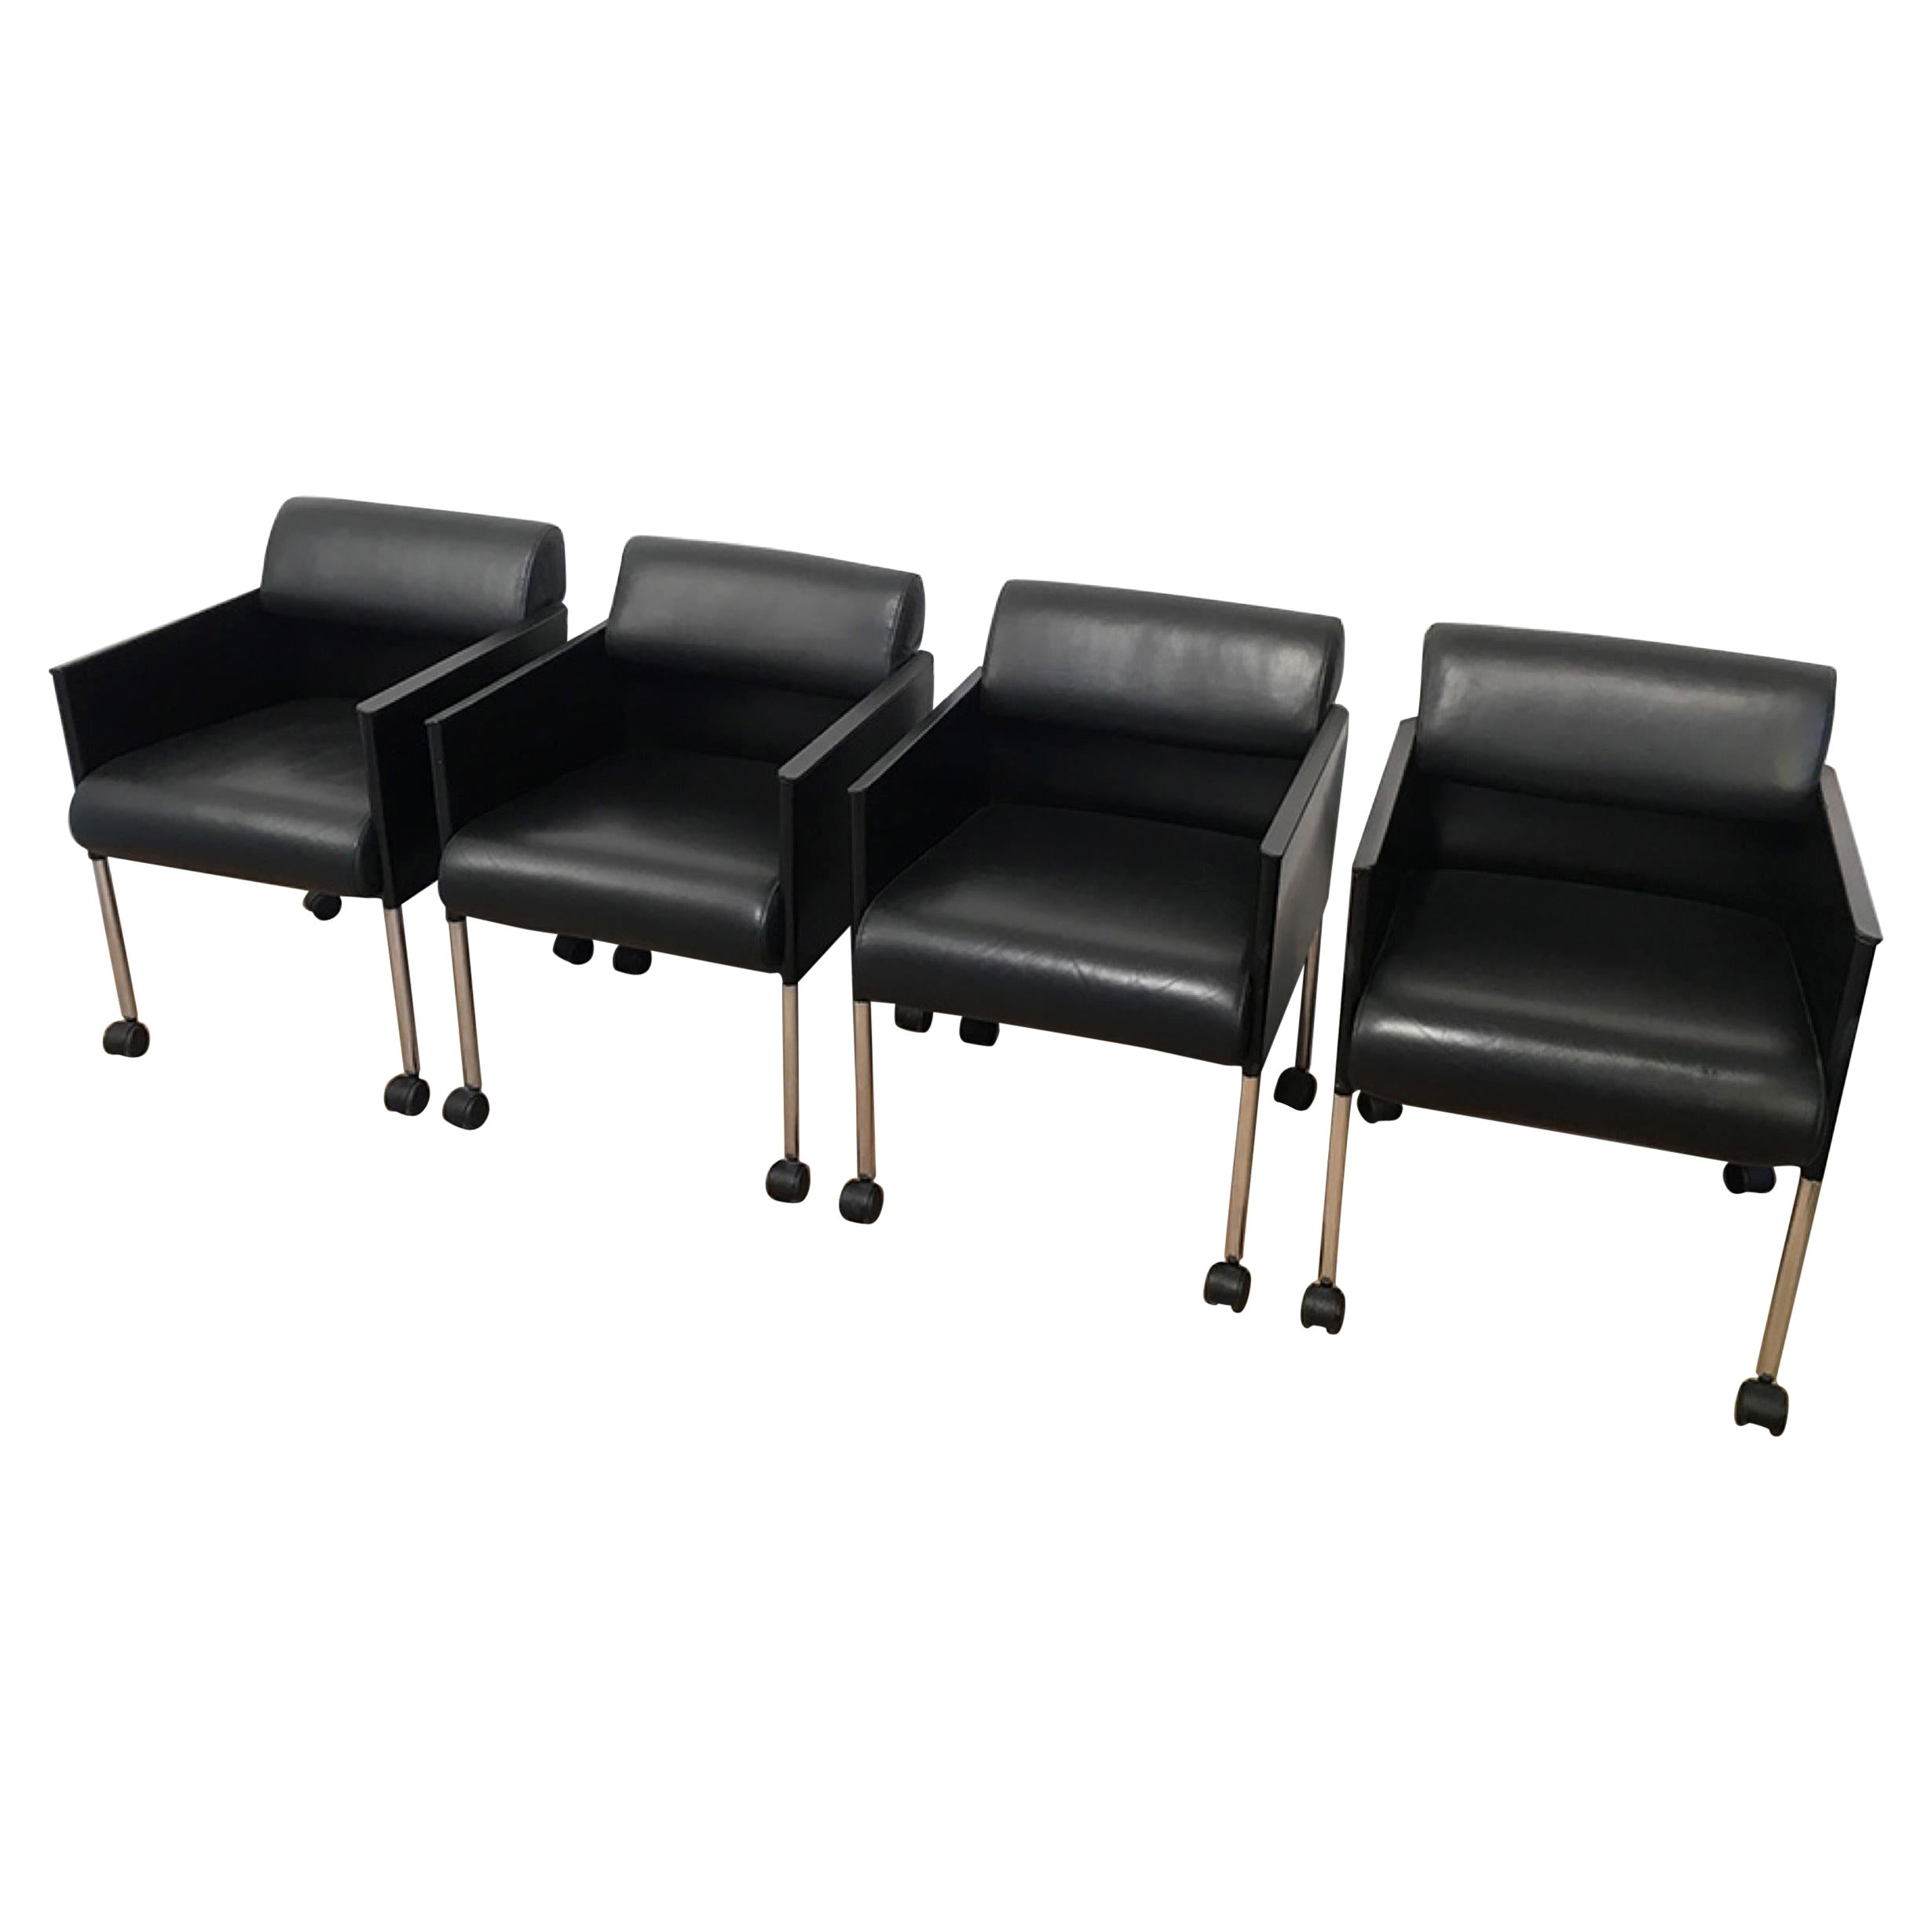 Set of 4 Black Lacquered and Leather Armchairs on Casters by Rosenthal. Cir 1970 For Sale